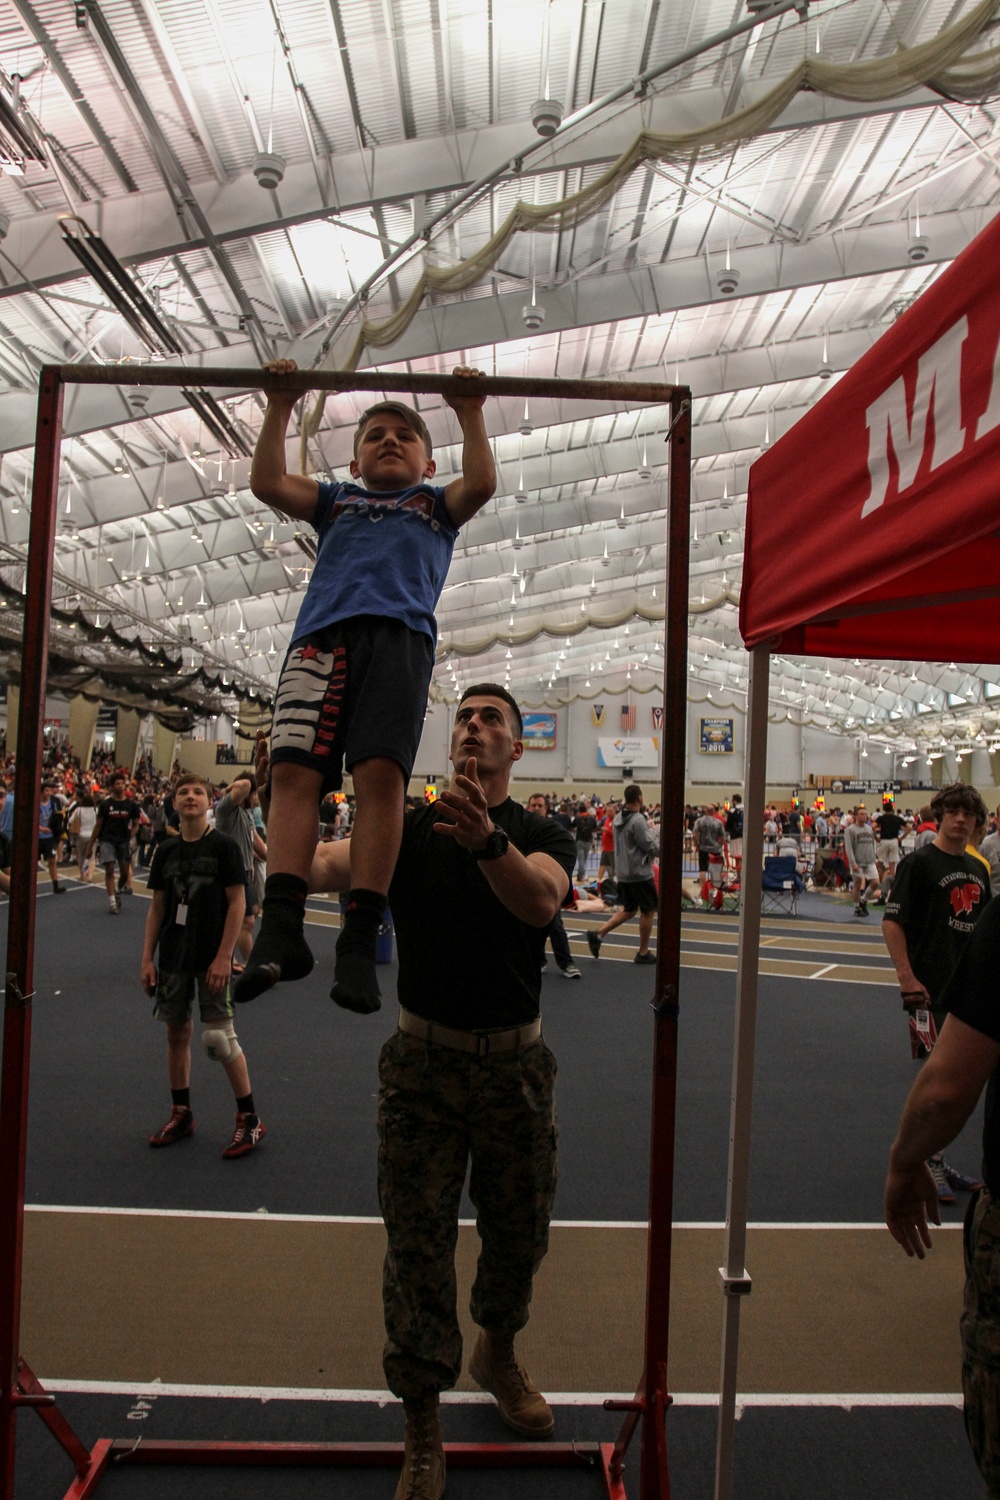 Marines attend wrestling national championships in Akron, Ohio